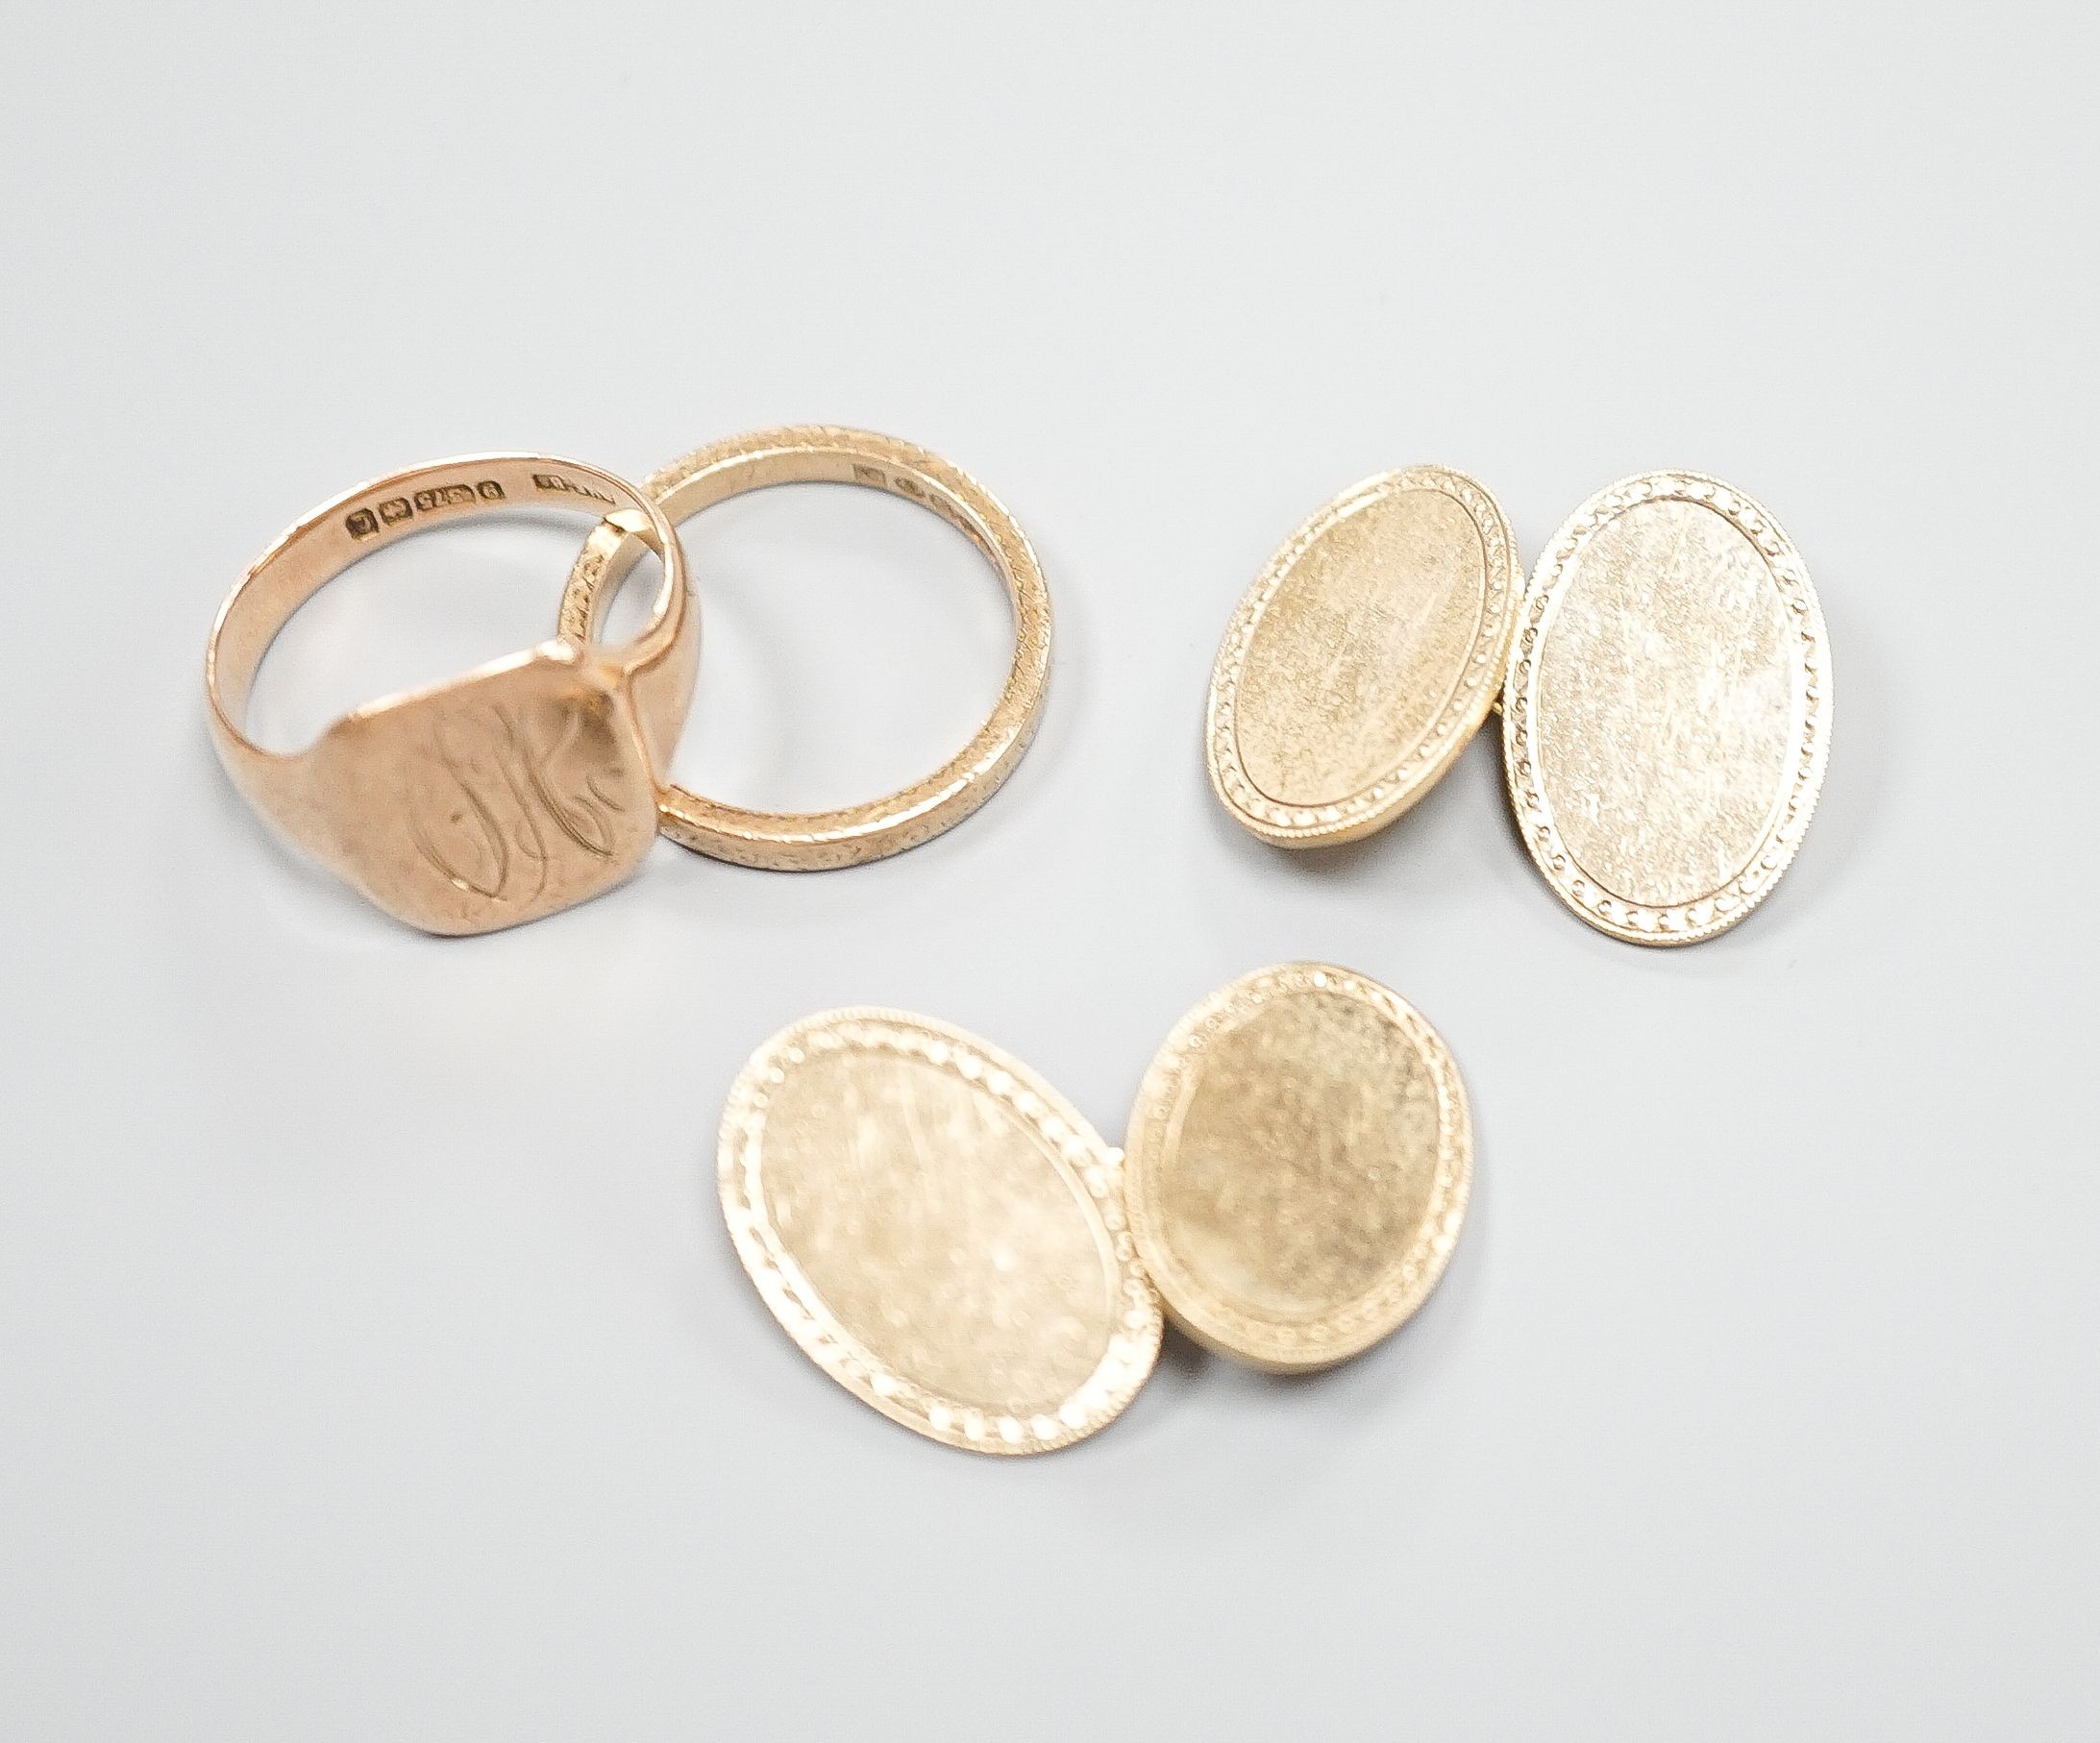 A 9ct gold wedding band, a 9ct gold signet ring and a pair of 9ct gold oval cufflinks